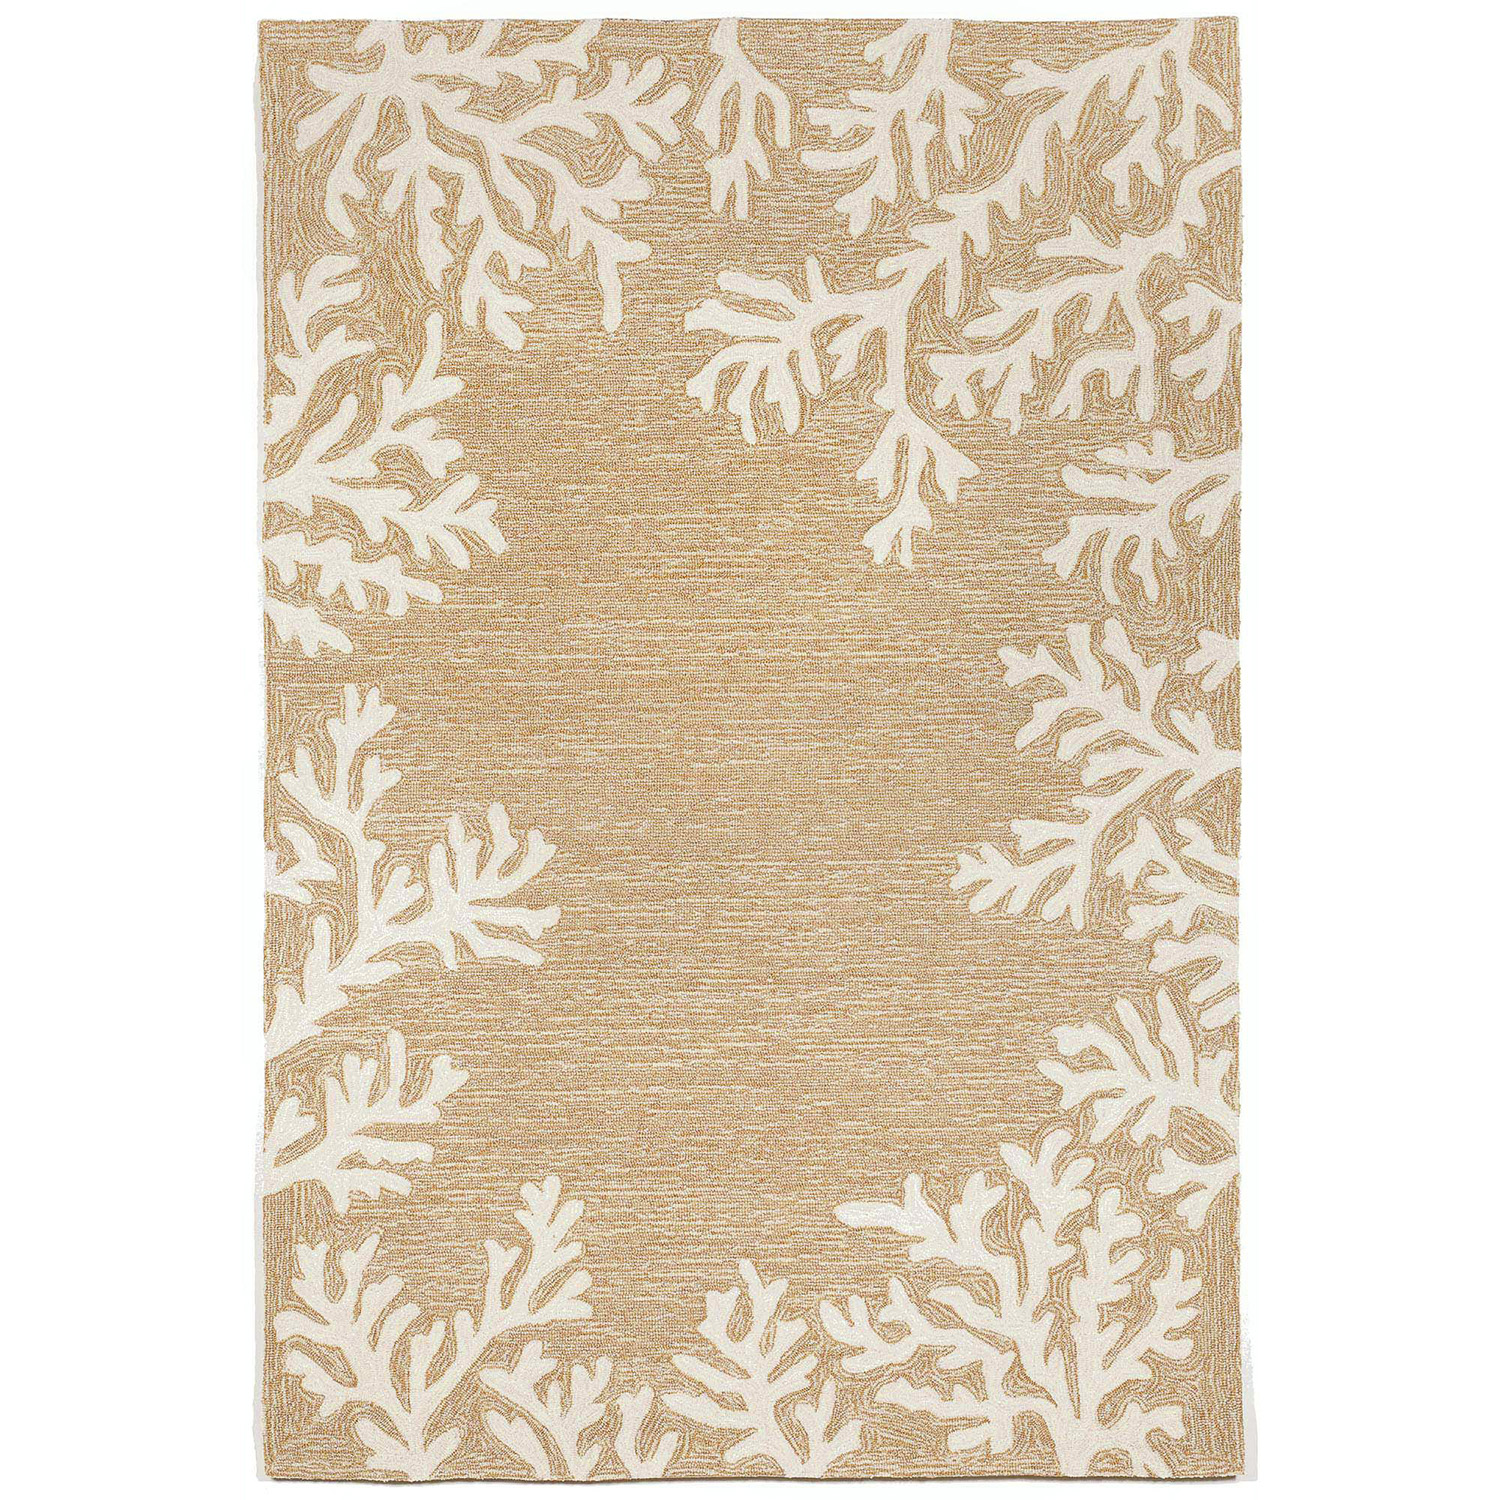 Liora Manne Capri Indoor/Outdoor Durable Hand-Tufted  UV Stabilized Rug- Coral Border Neutral  Product Image